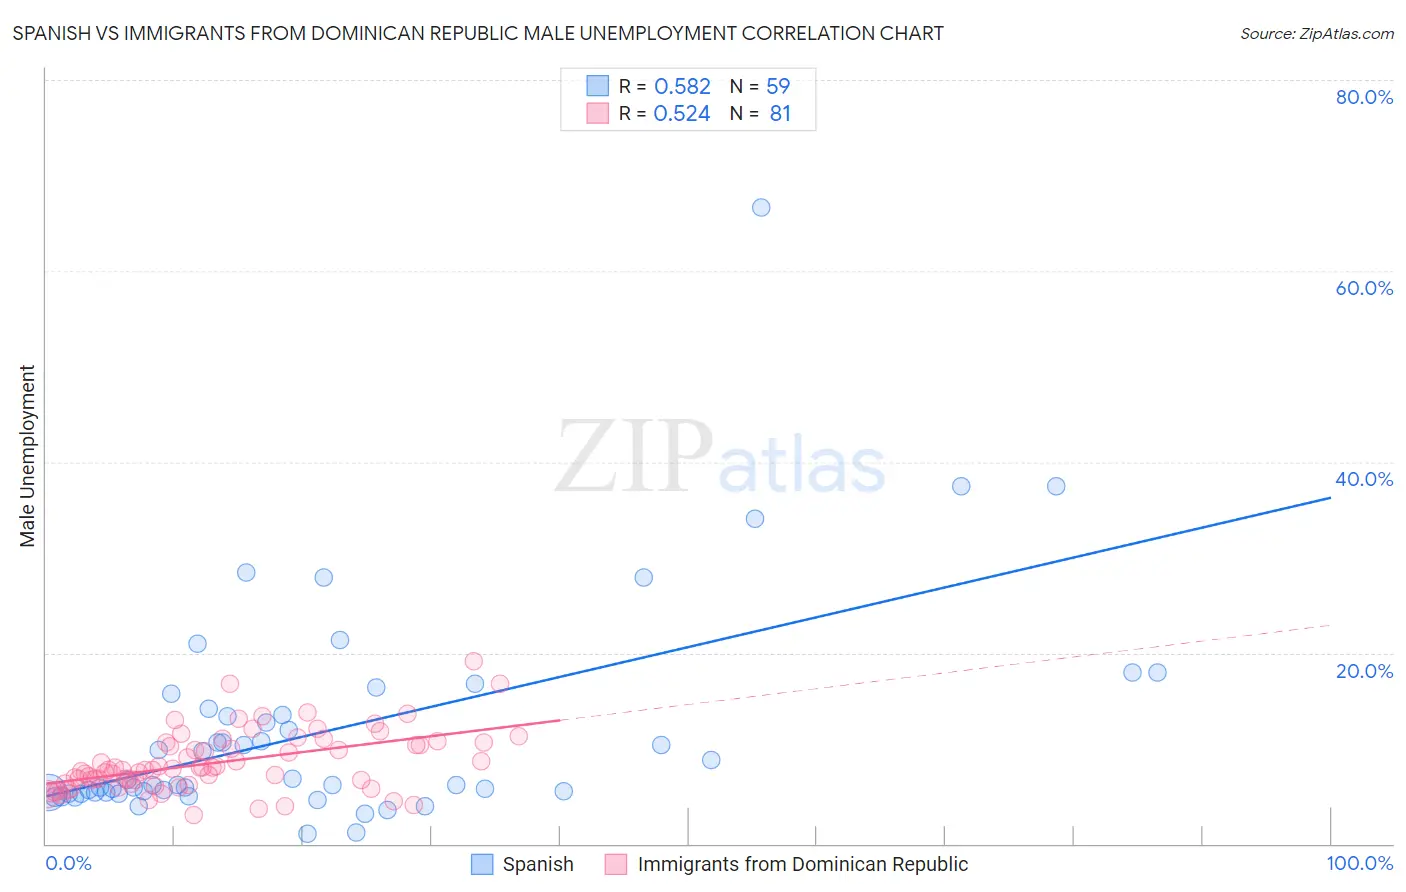 Spanish vs Immigrants from Dominican Republic Male Unemployment